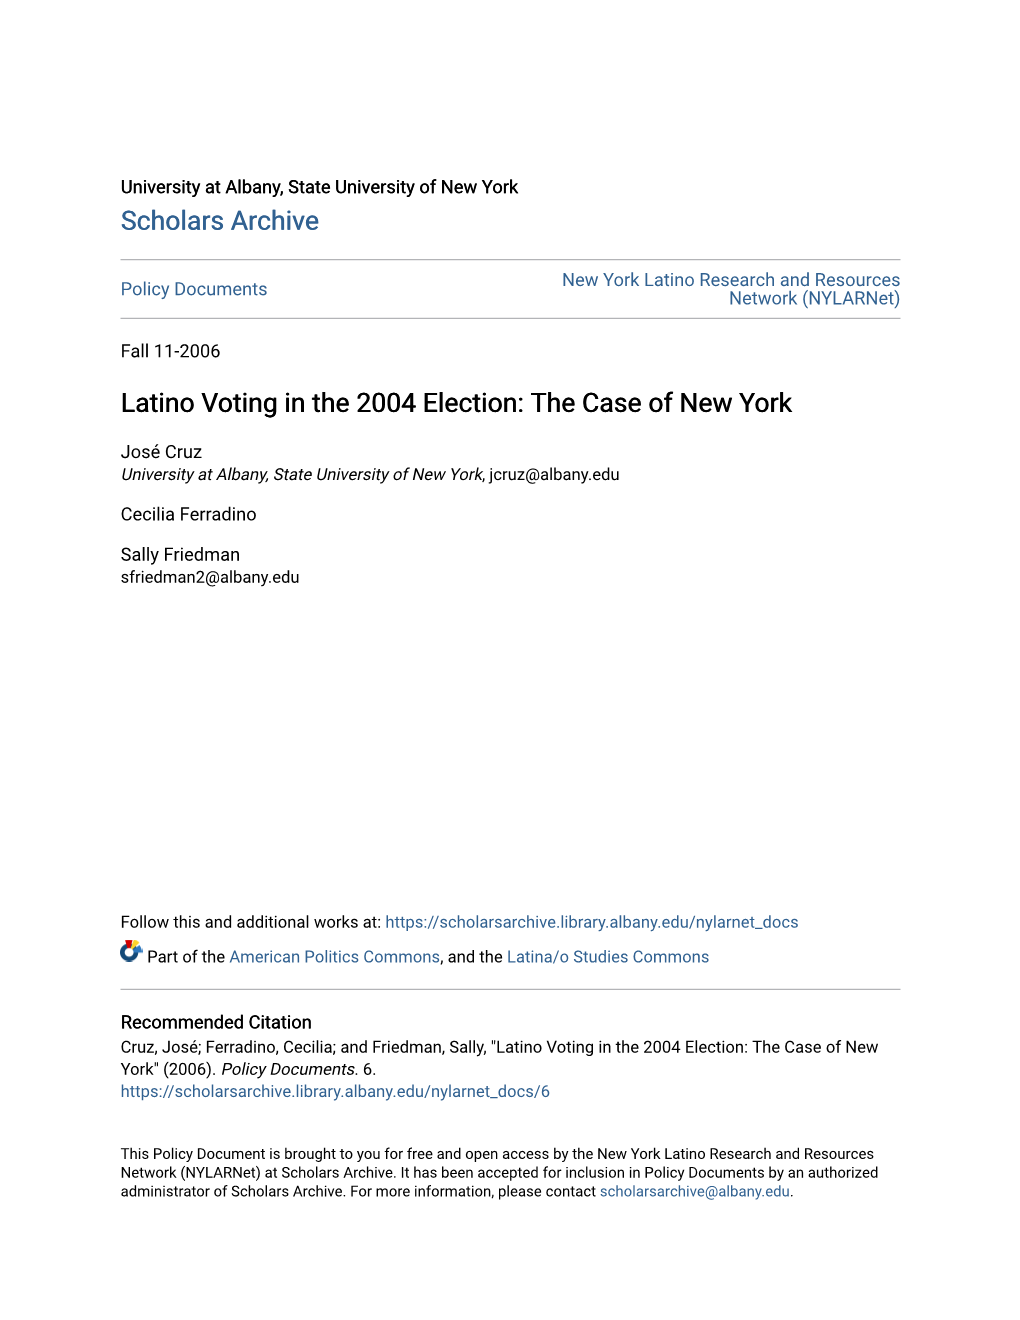 Latino Voting in the 2004 Election: the Case of New York